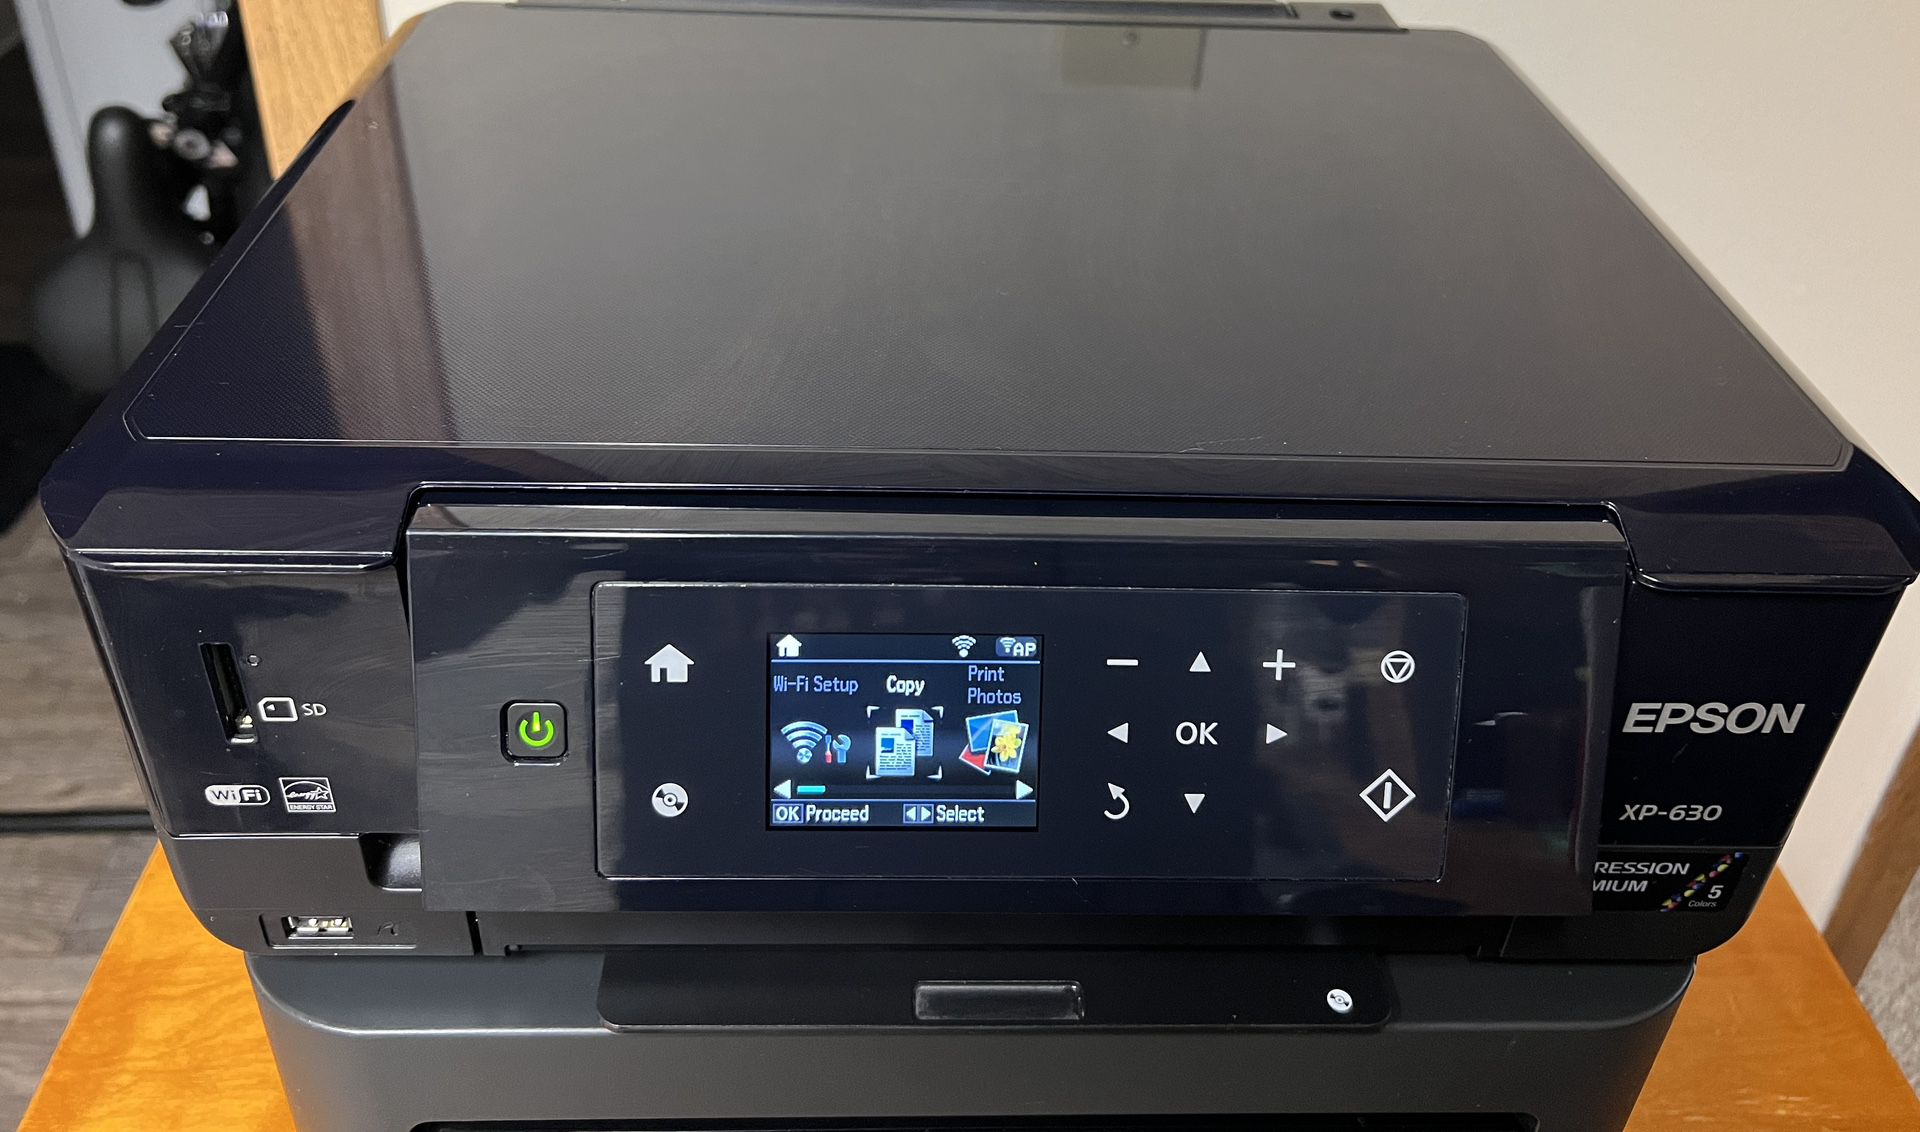 Epson XP-630 All In one Wireless & Brother HL-2270DW Wireless Printers